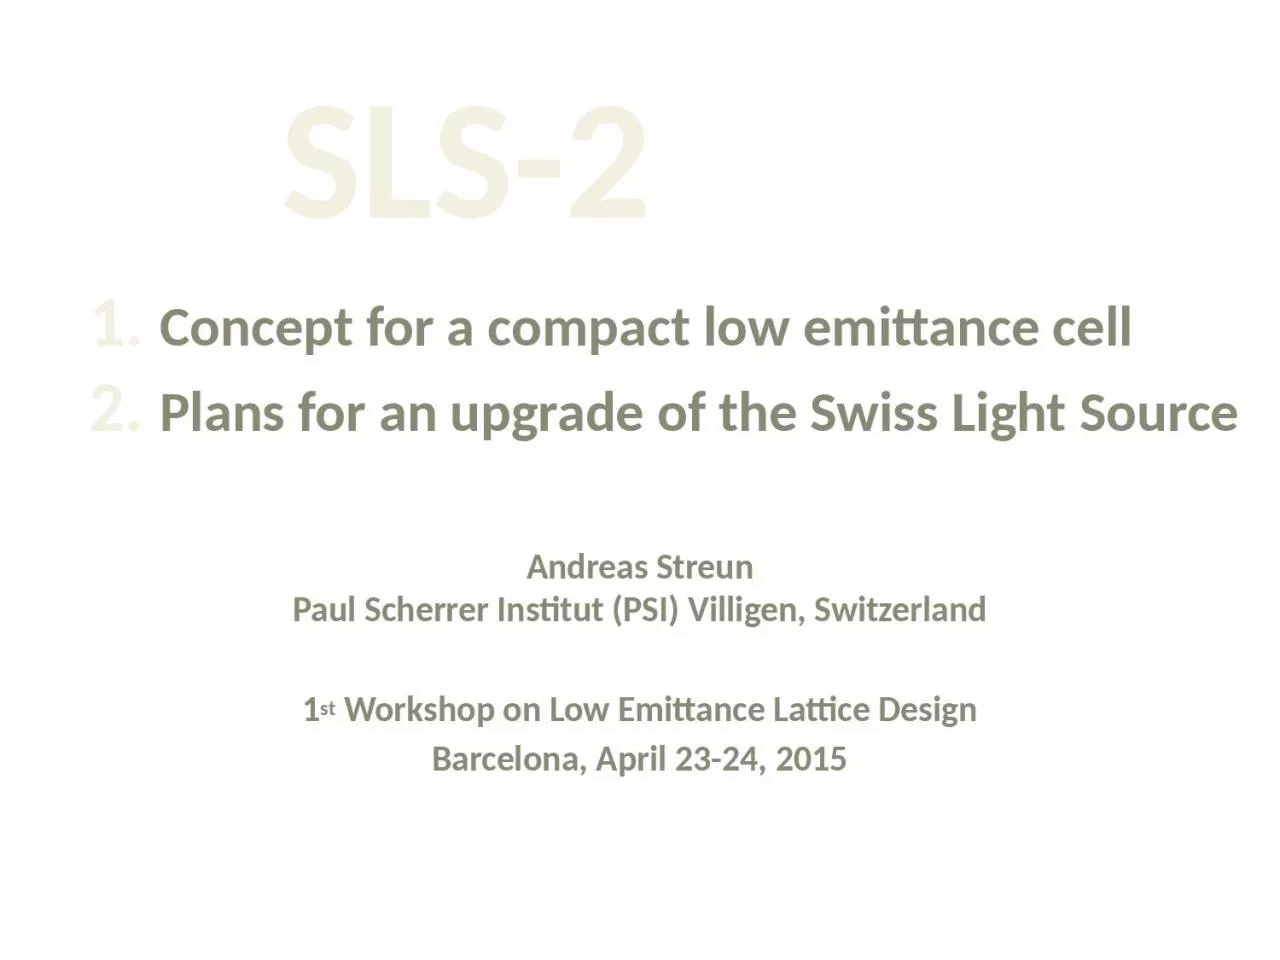 SLS-2 1 .  Concept for a compact low emittance cell